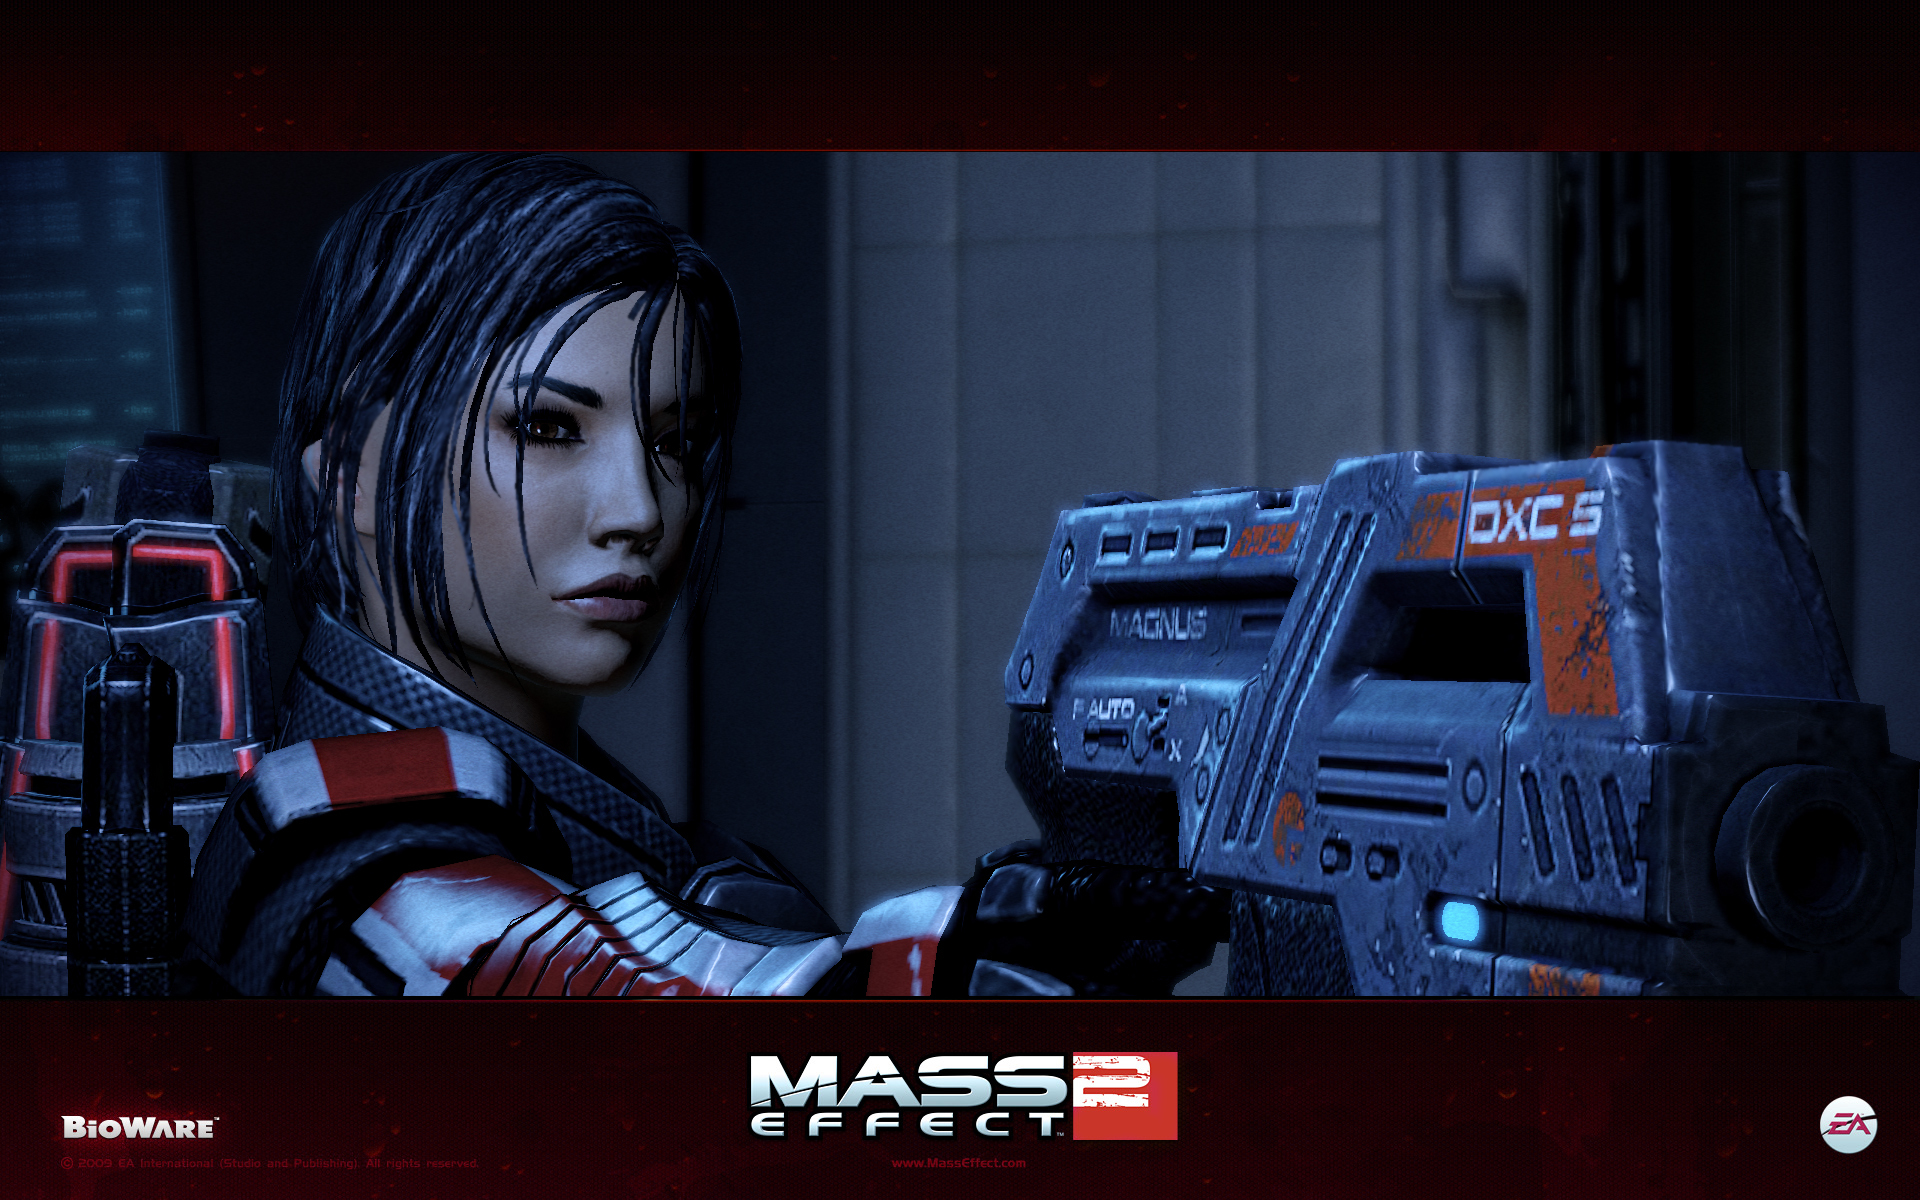 Related Articles Mass Effect Cheats For Ps3